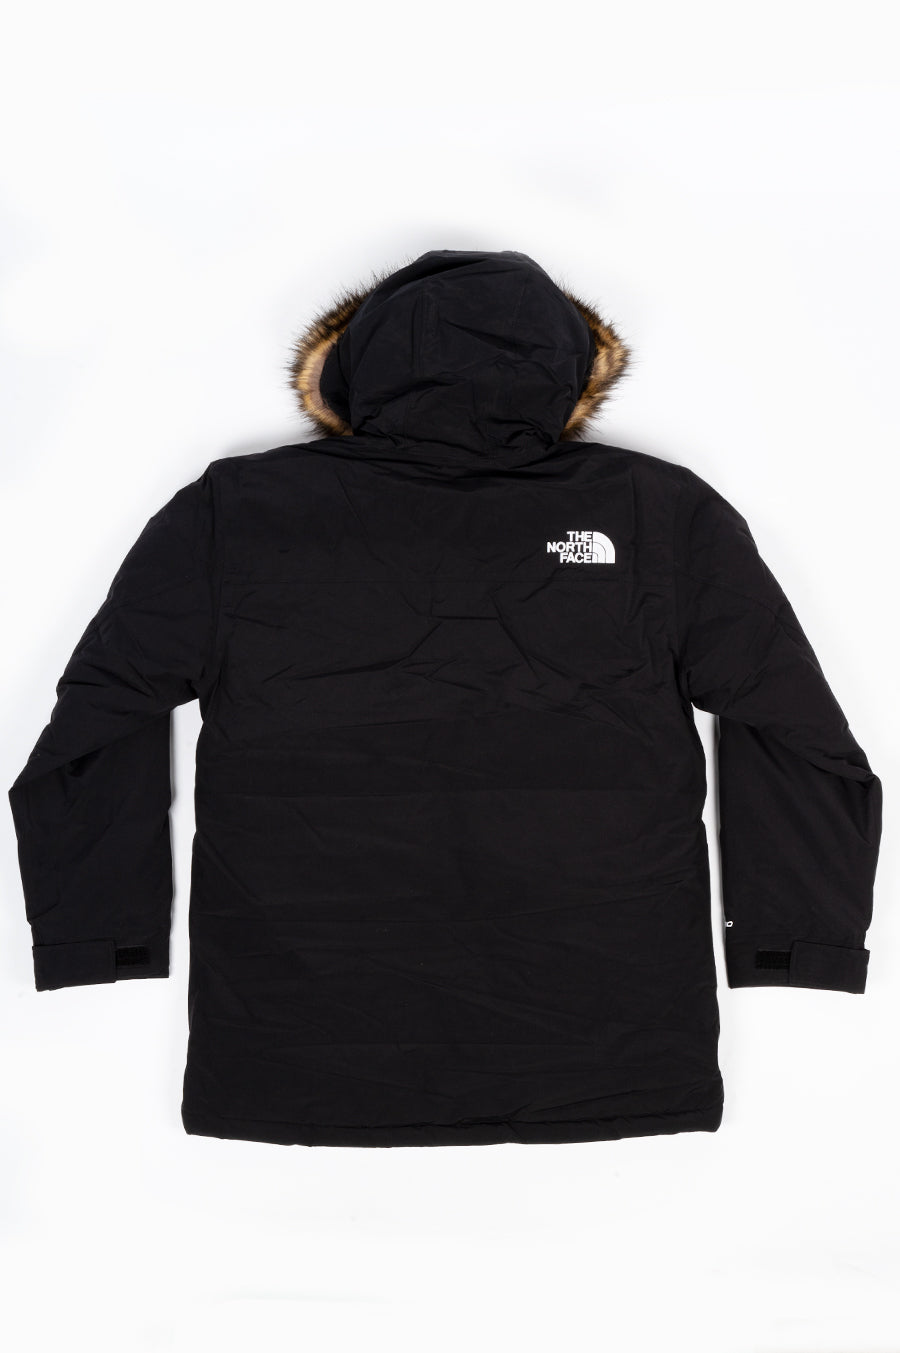 THE NORTH FACE MCMURDO PARKA – BLENDS